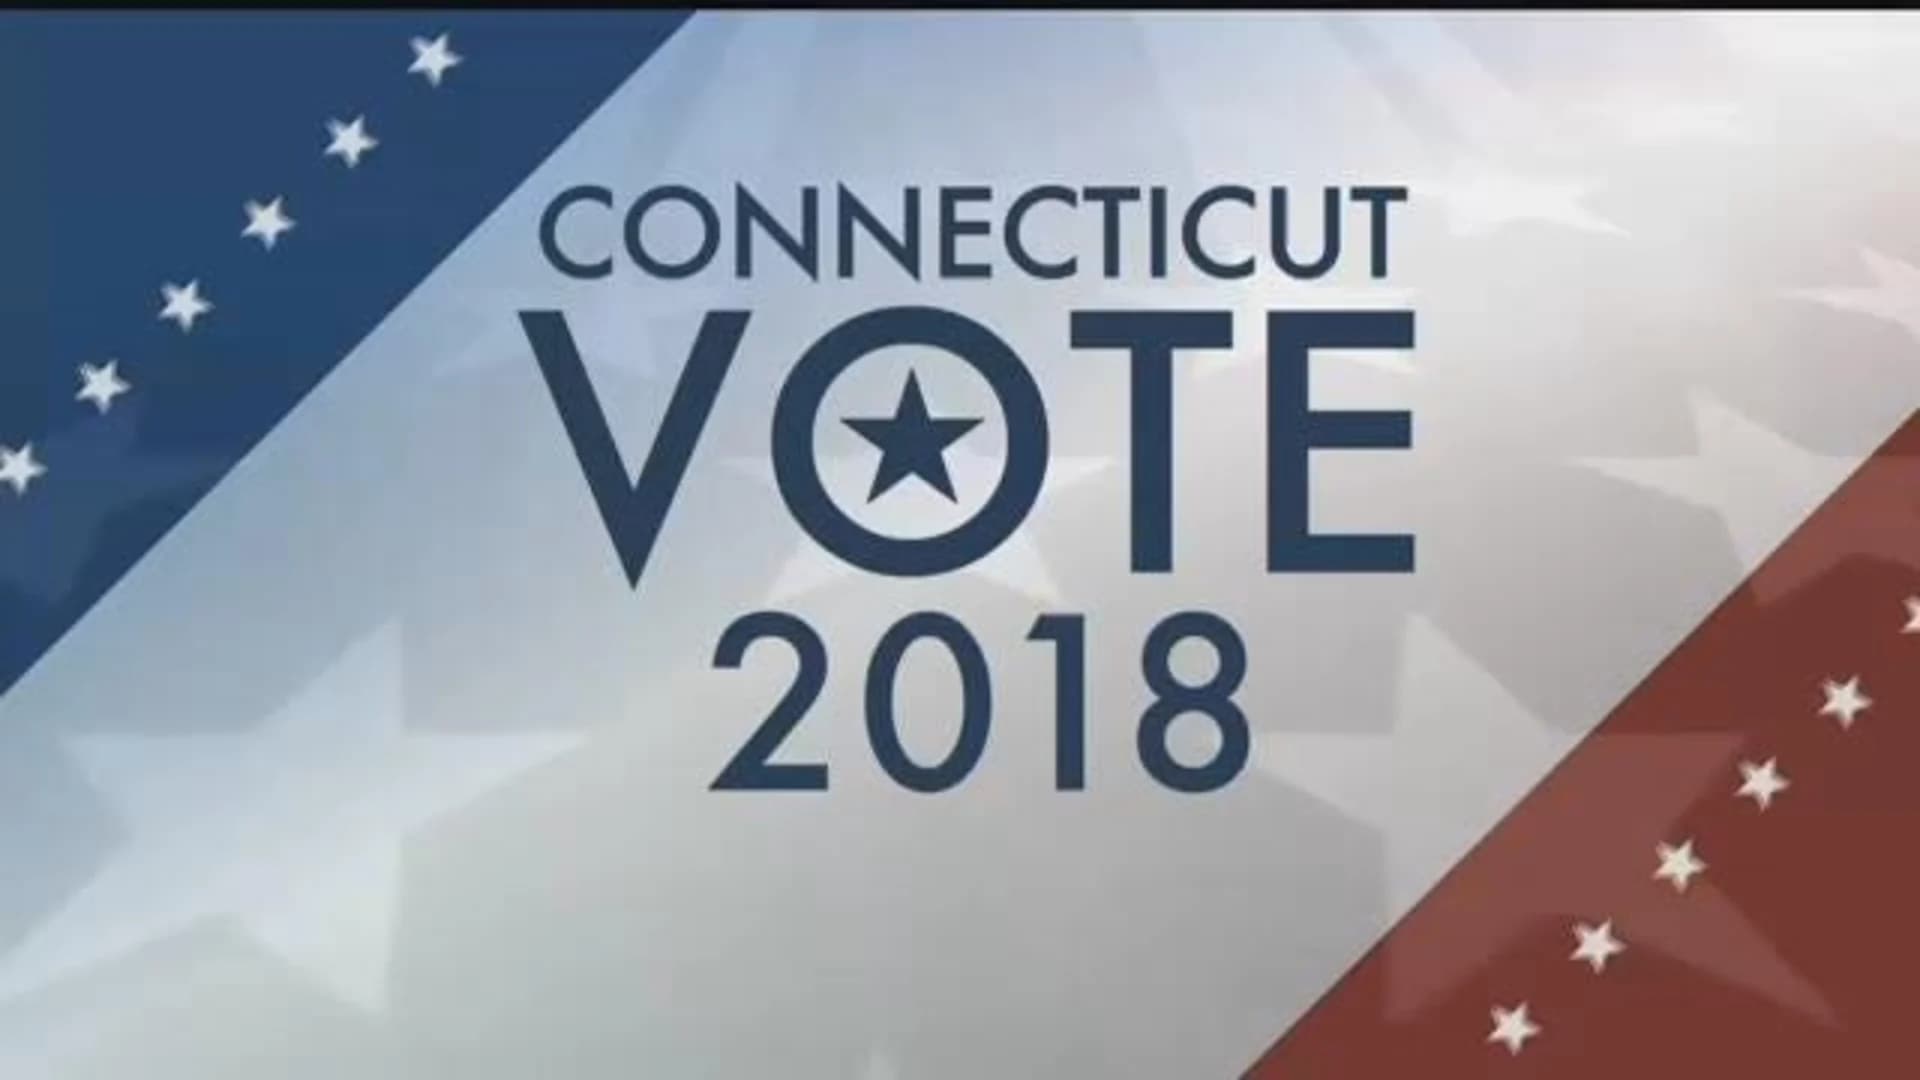 Connecticut Vote 2018 - Complete Election Results